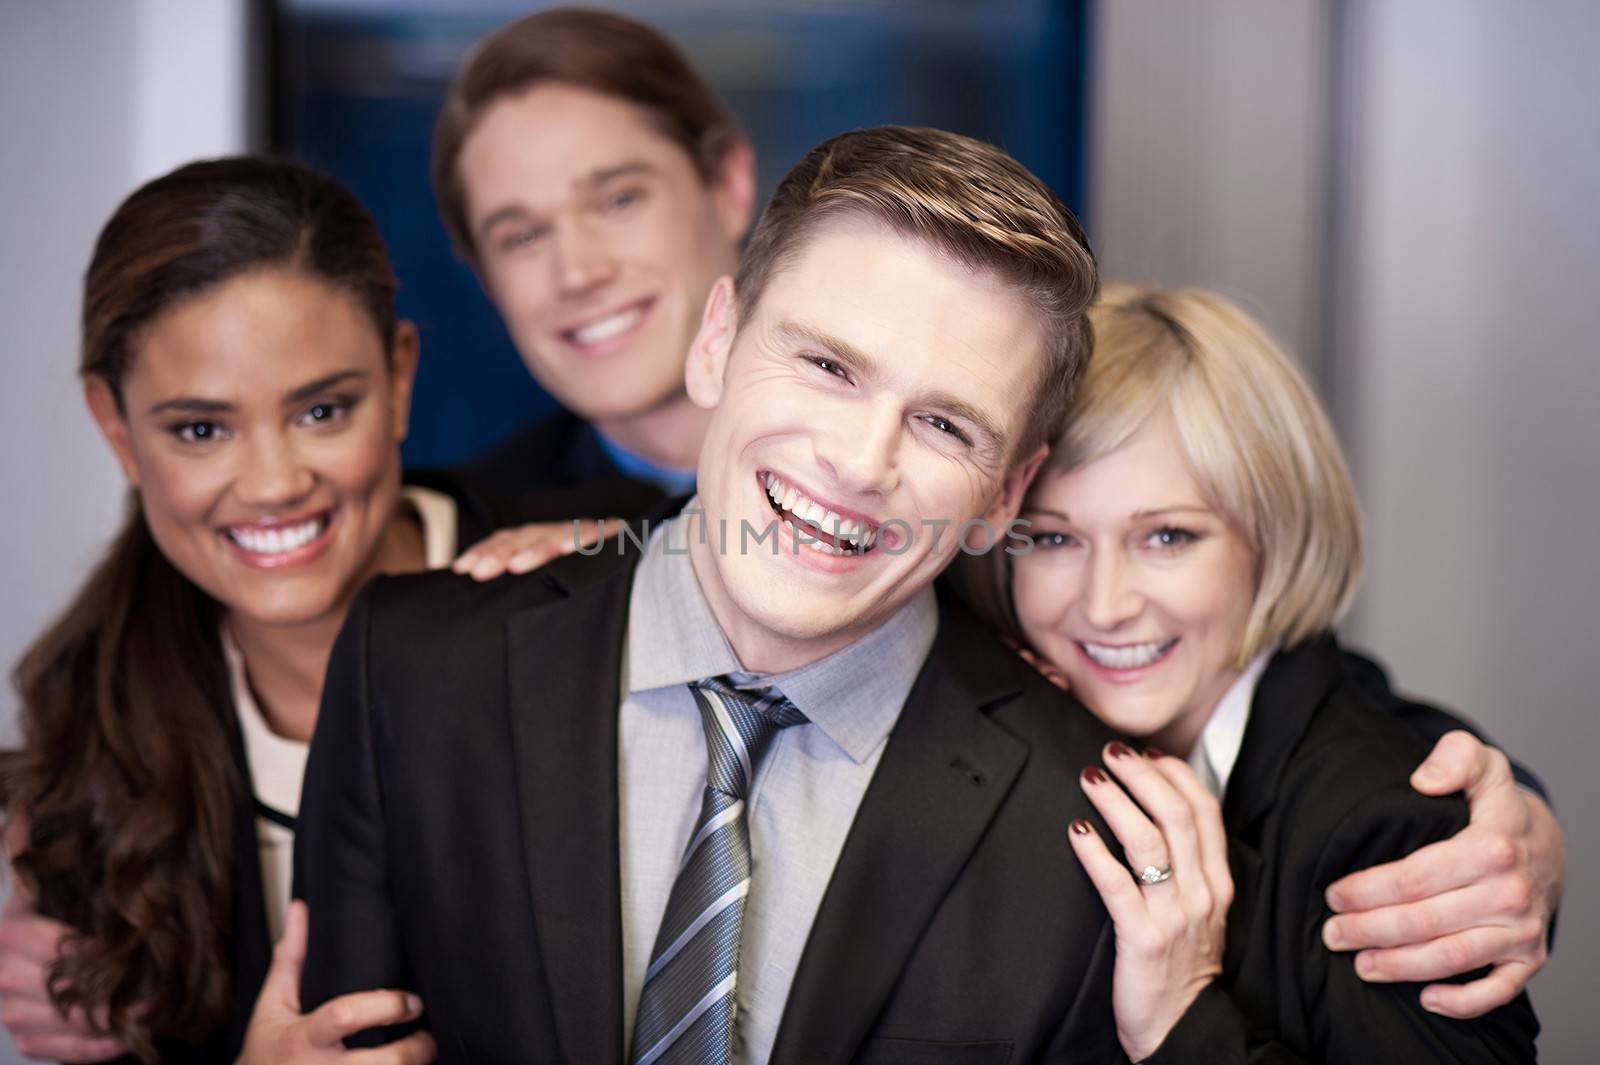 Business team of four having fun at work by stockyimages